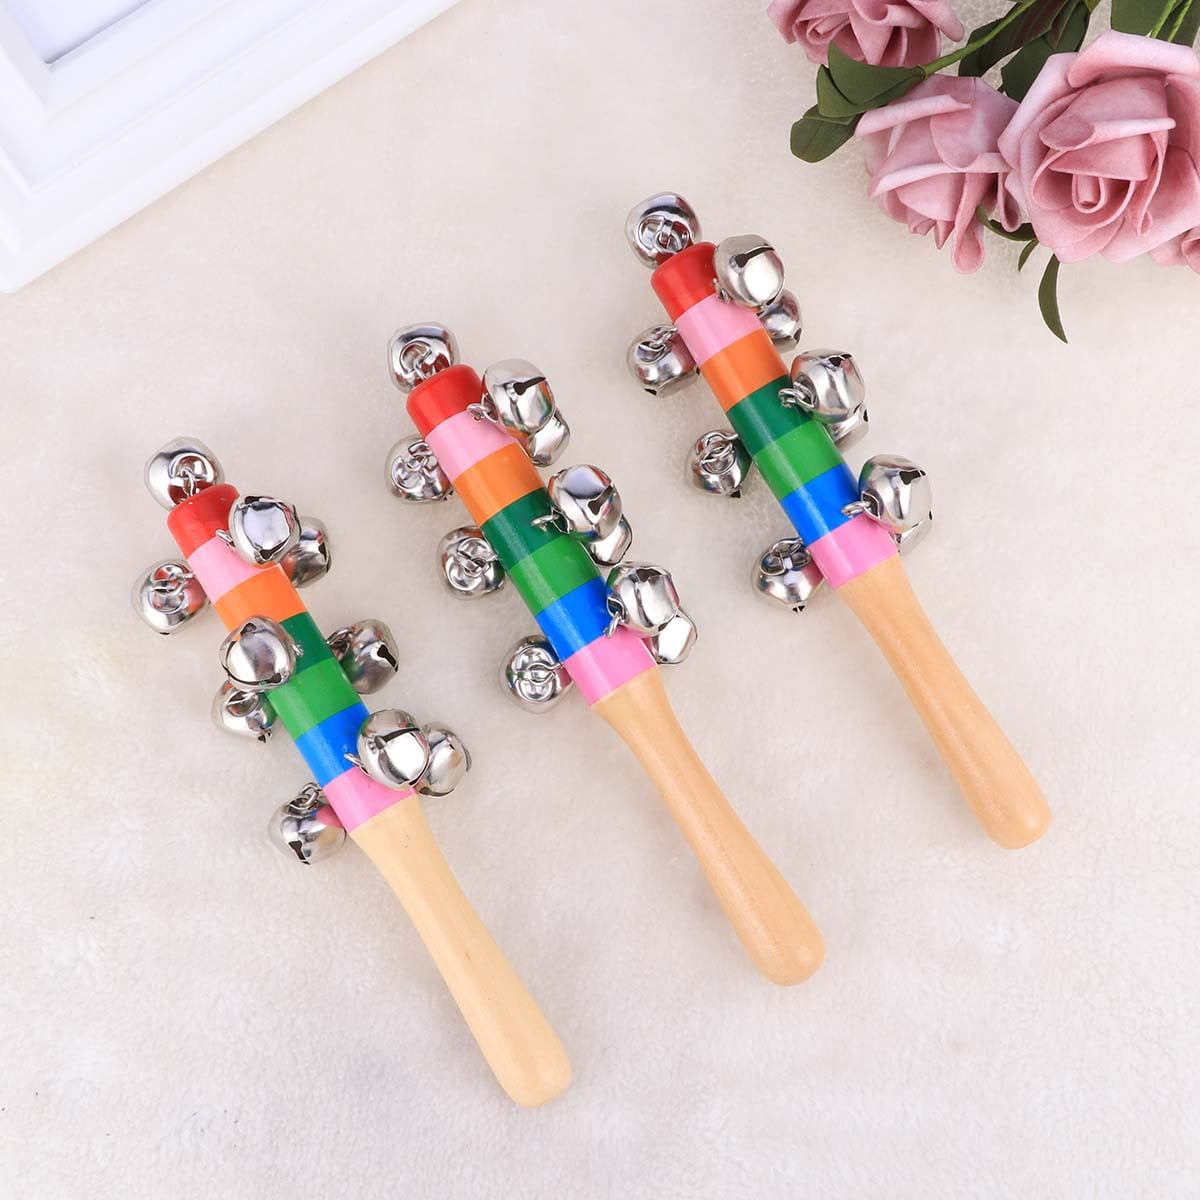 TOYMYTOY 3pcs Baby Kids Toys Jingle Bell Christmas Hand Jingle Bells Children Musical Instrument with Wood Handle 